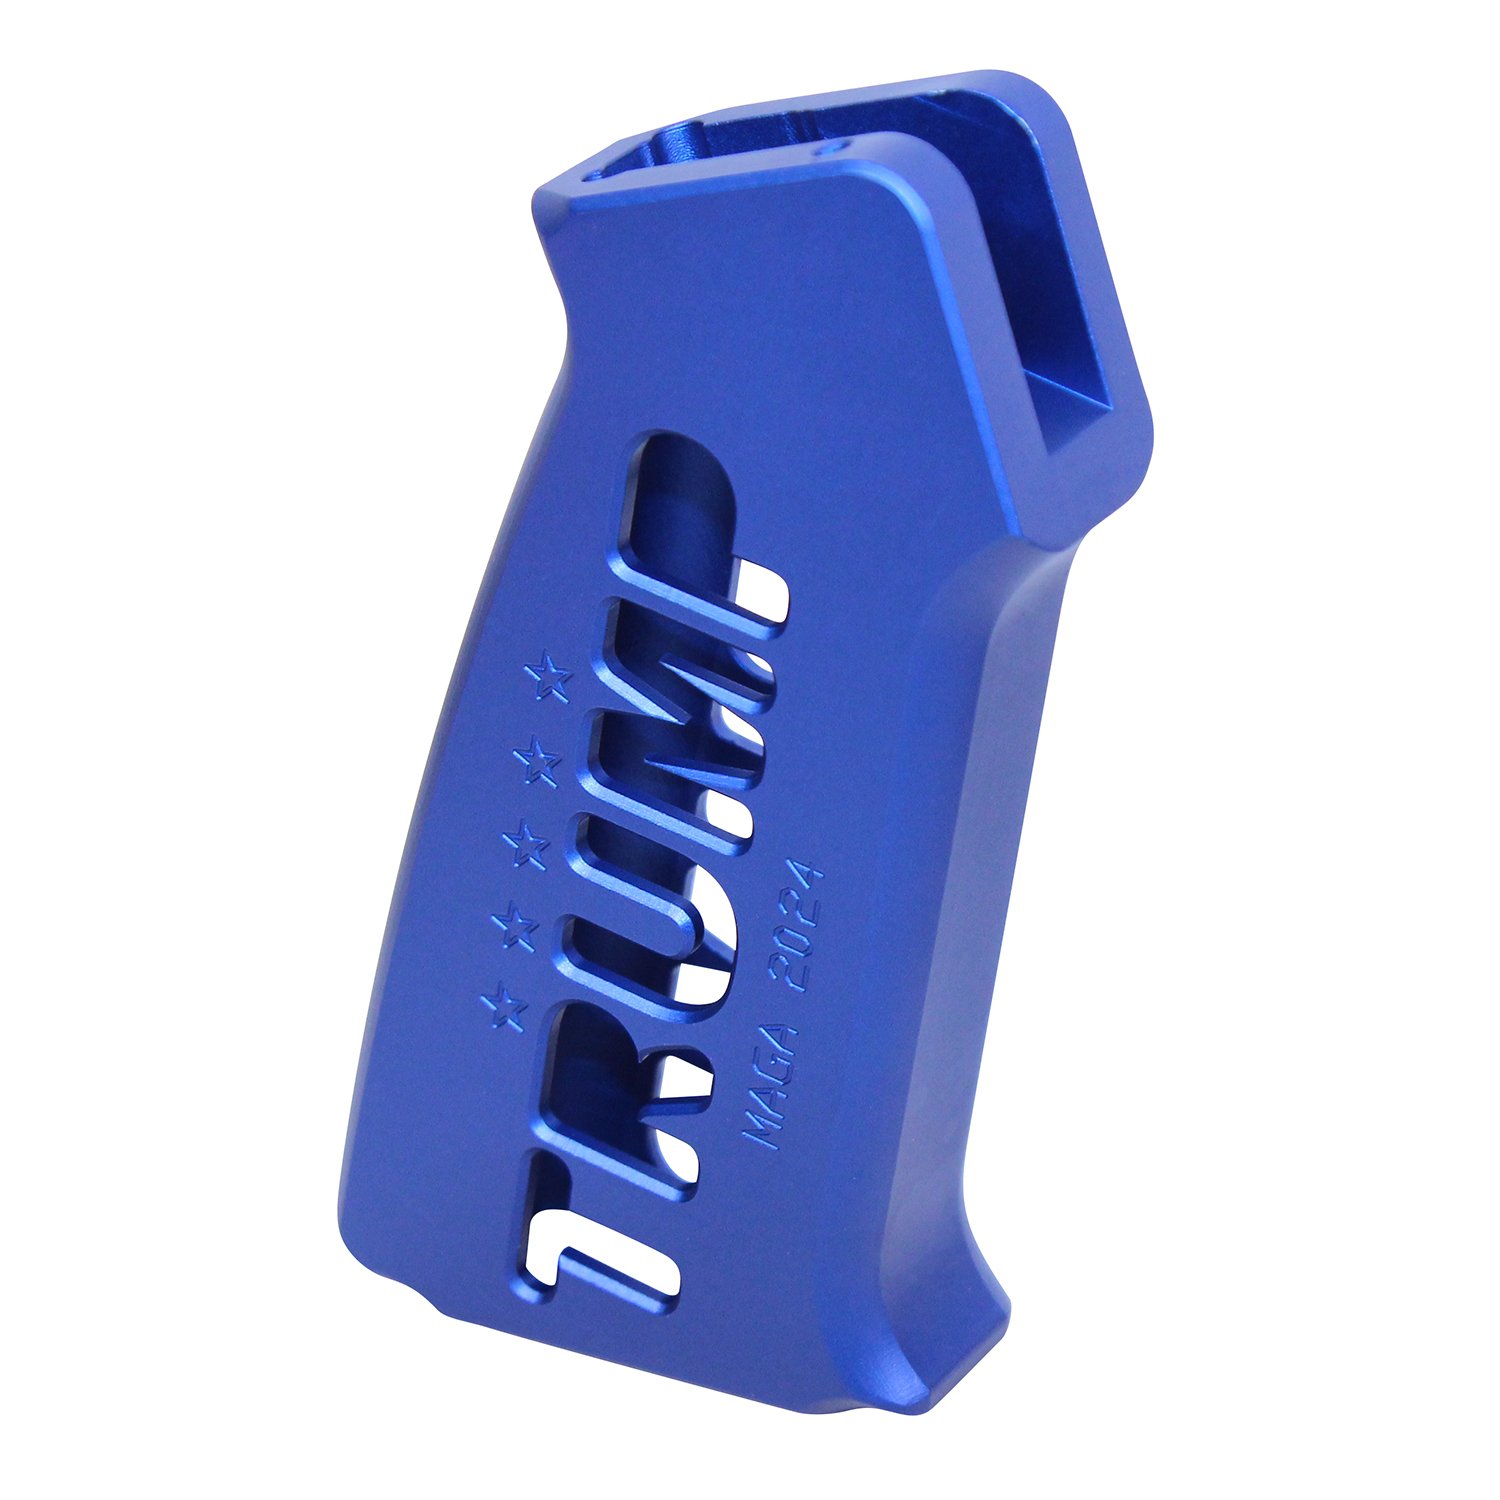 AR-15 "Trump Series" Limited Edition Pistol Grip in Anodized Blue